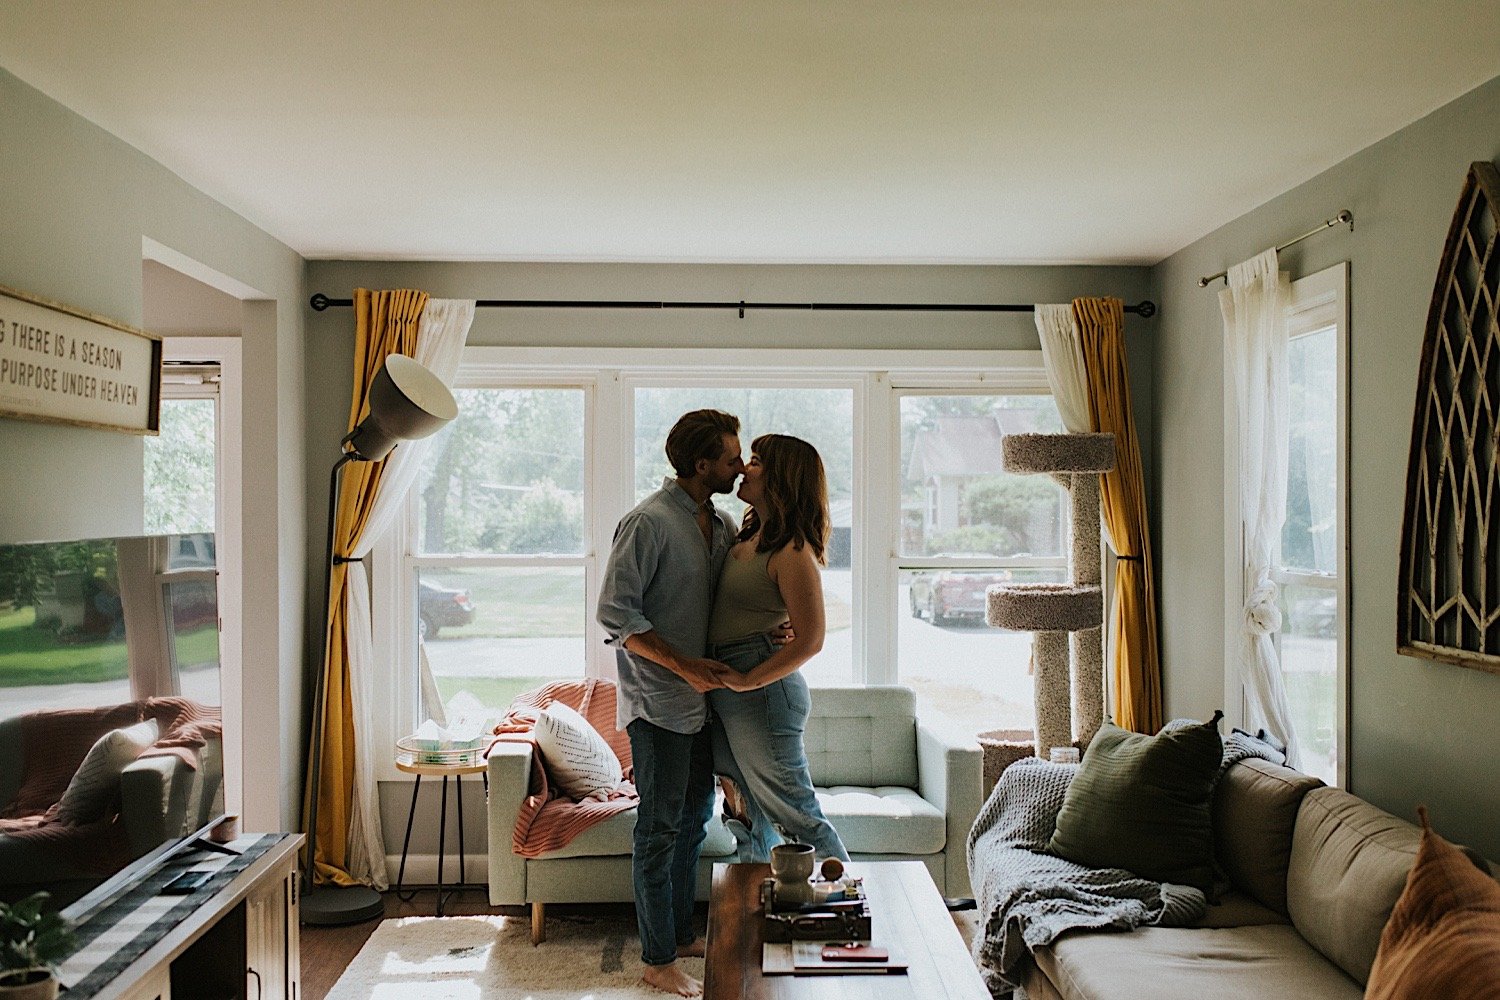 A married couple holding hands and kissing while standing in front of the window in their living room.